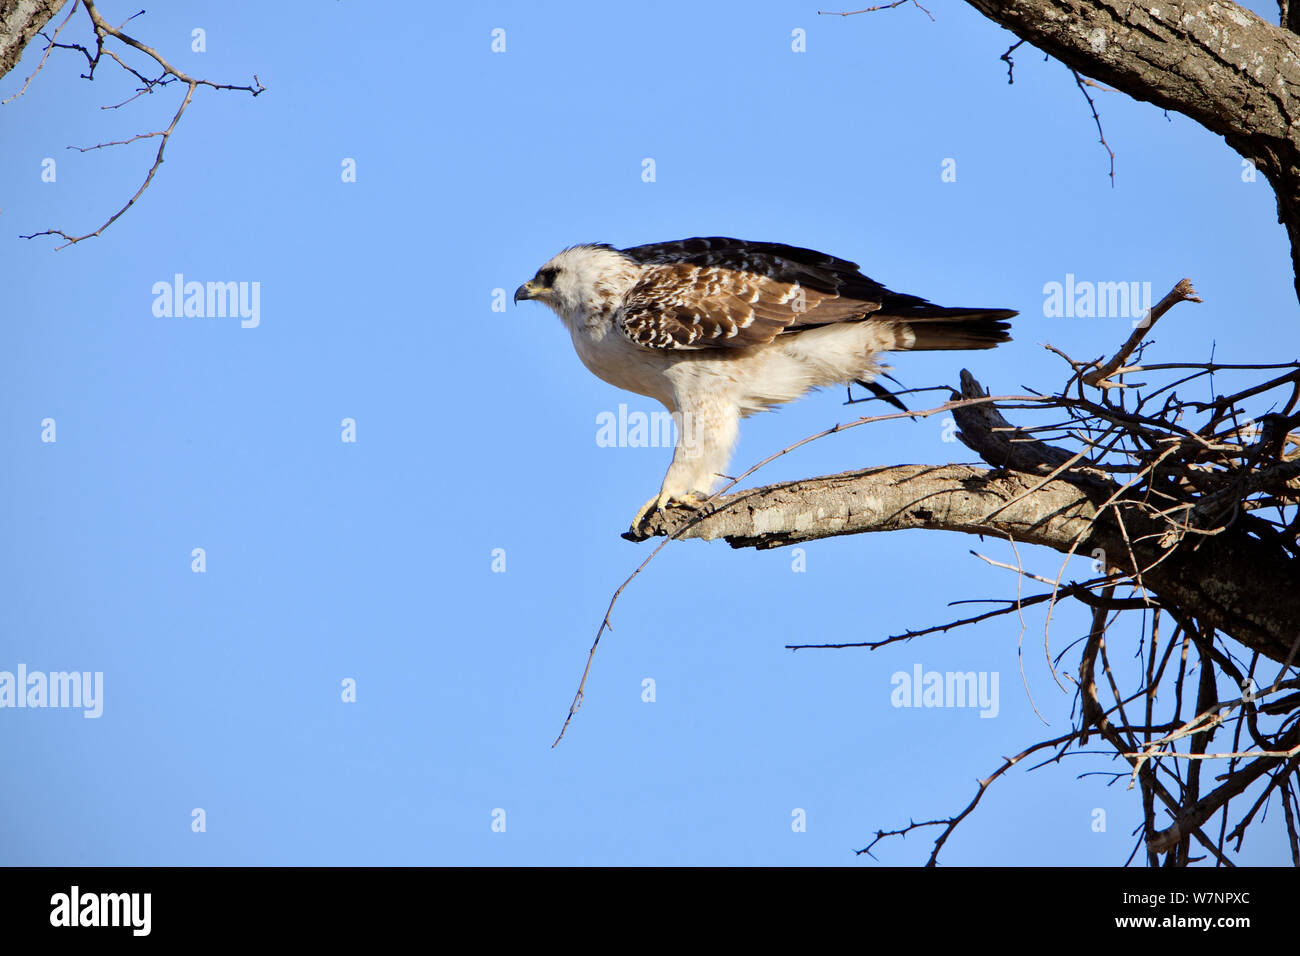 Wahlberg's eagle (Aquila wahlbergi) in a tree, Kruger National Park, Transvaal, South Africa, September. Stock Photo